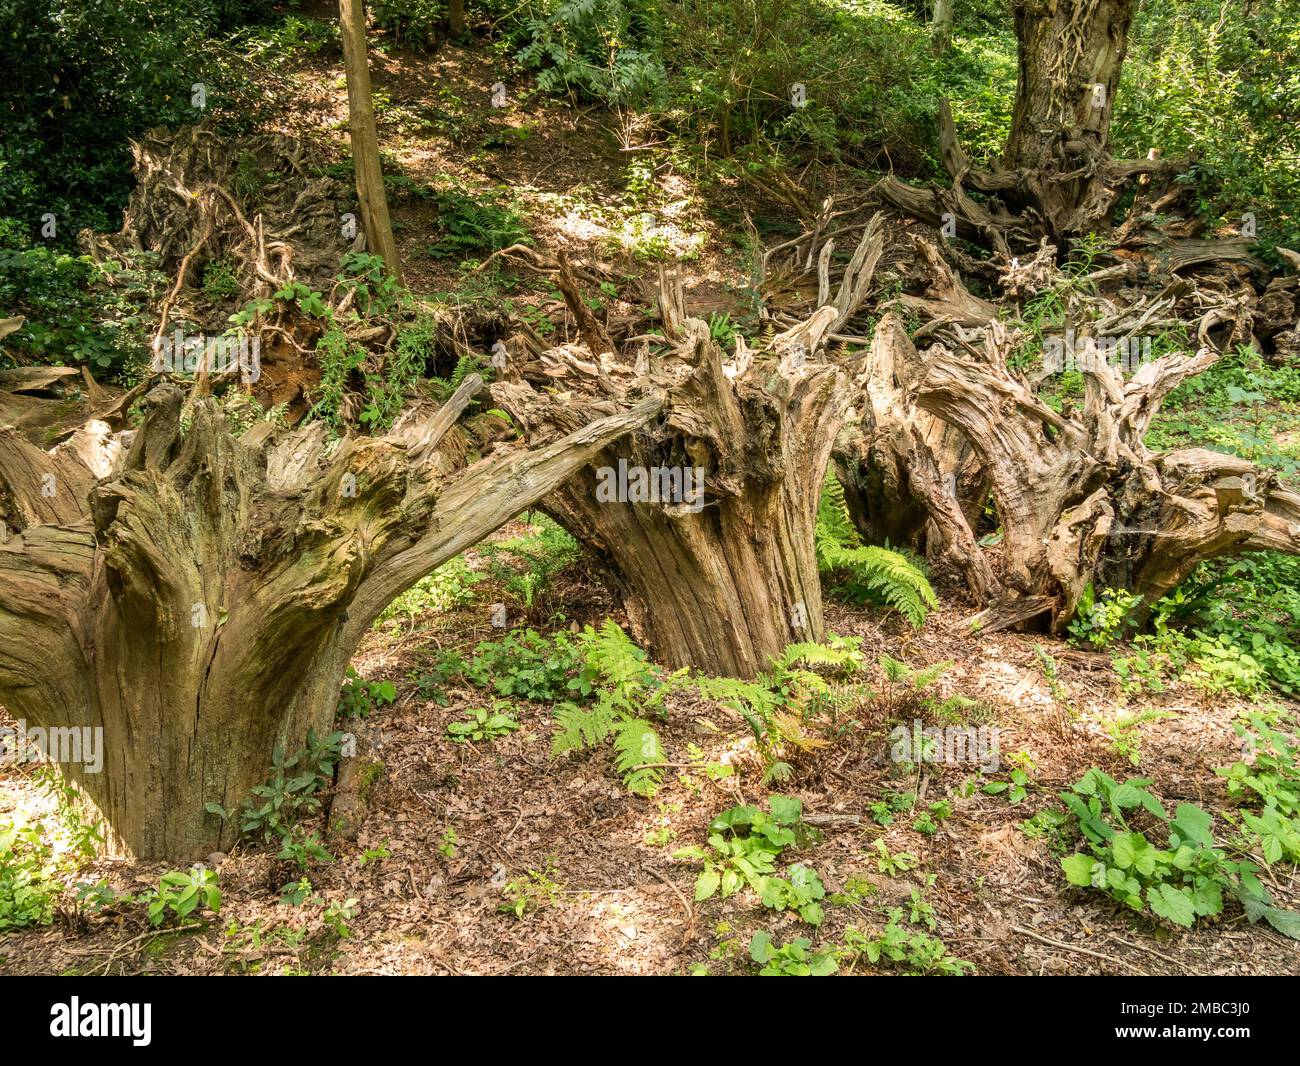 The Stumpery, Belvoir Castle Gardens, Leicestershire, England, UK Stock Photo